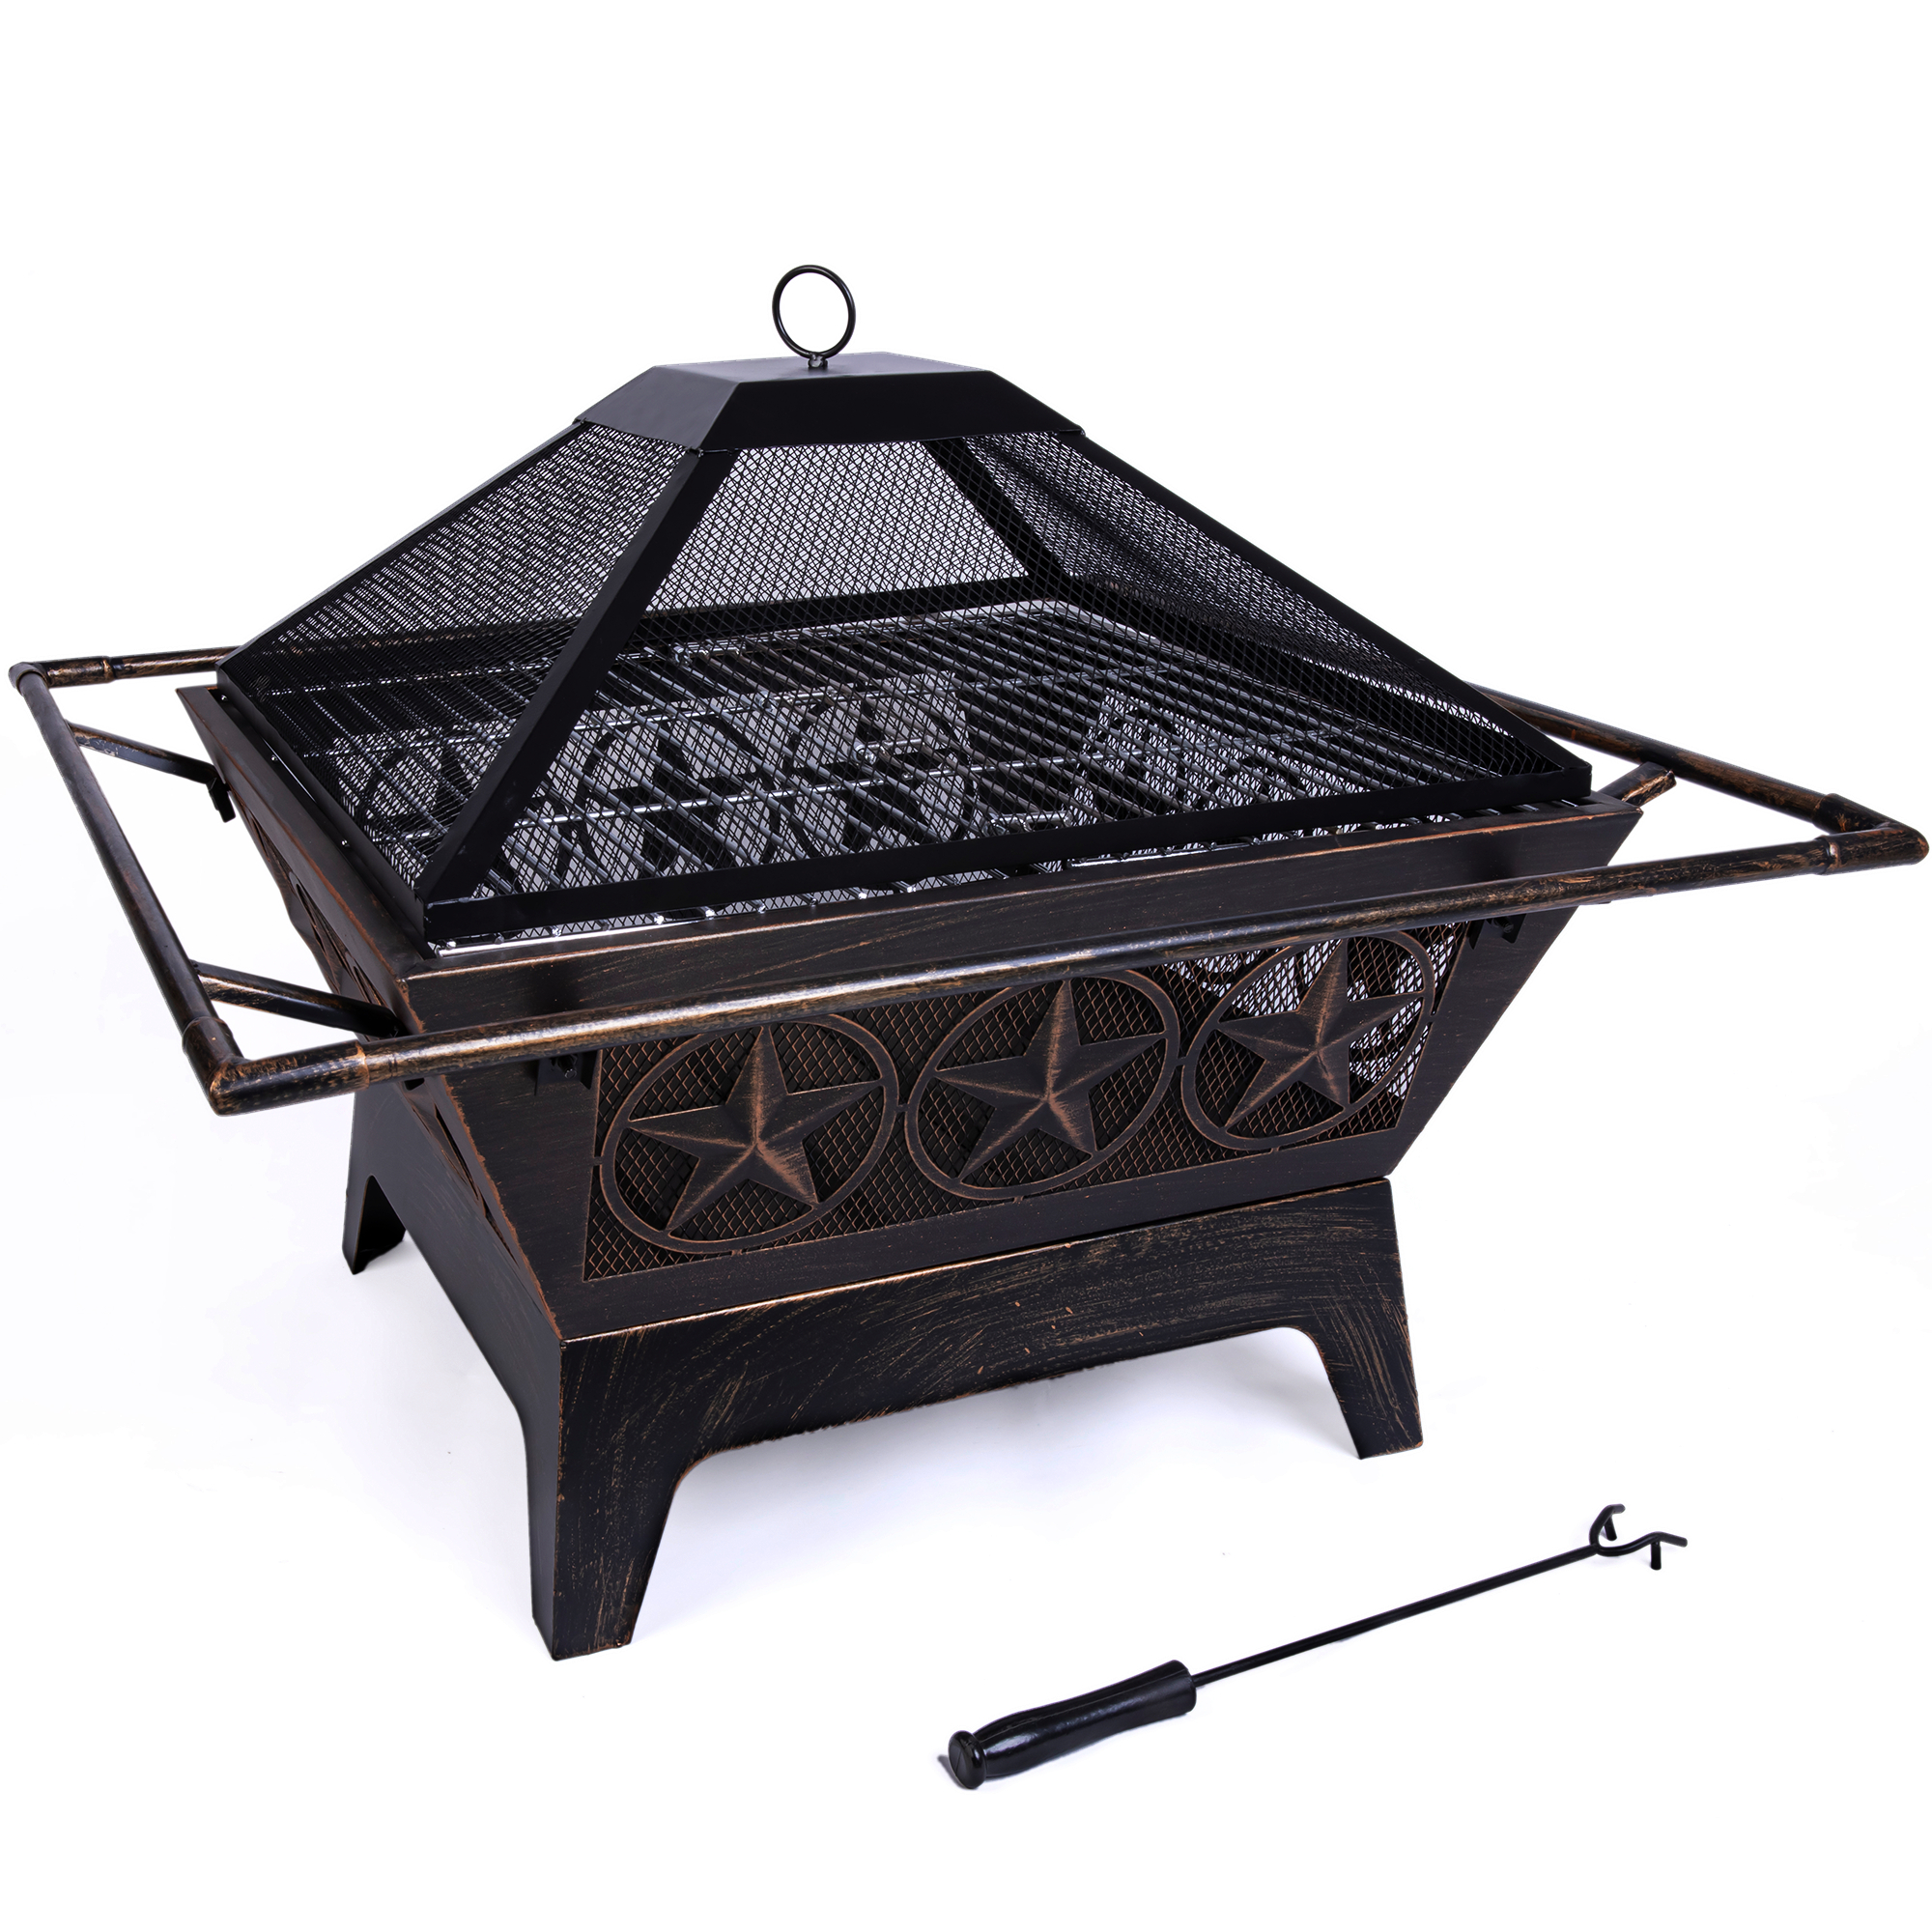 Project One Galaxy Heavy-Duty Fire Pit - 32 Inch Steel Large Square Wood Burning Patio or Backyard Firepit - Weighs 30 Pounds - Cooking Gril